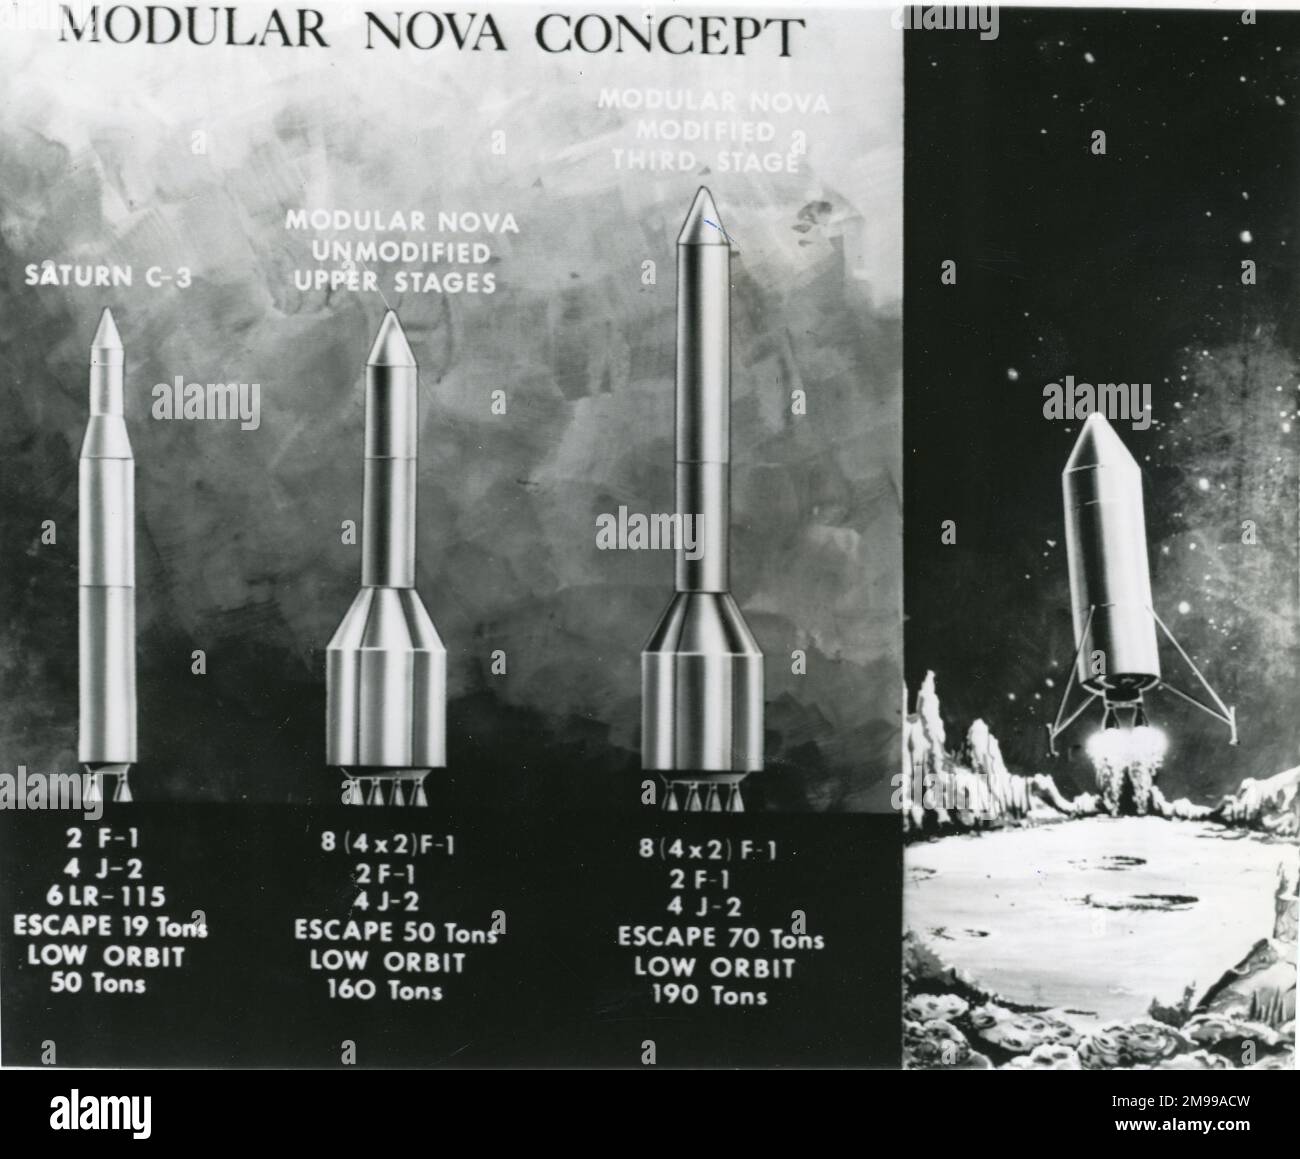 An infographic dated 26 May 1961 of NASA?s proposed Nova space launch vehicle which clustered the boosters of the Saturn C-3 and was capable of sending a three-man spacecraft on to the Moon plus 20tons of supplies and equipment to support a manned lunar station. With a nuclear third stage it could orbit Mars and return to Earth. Stock Photo